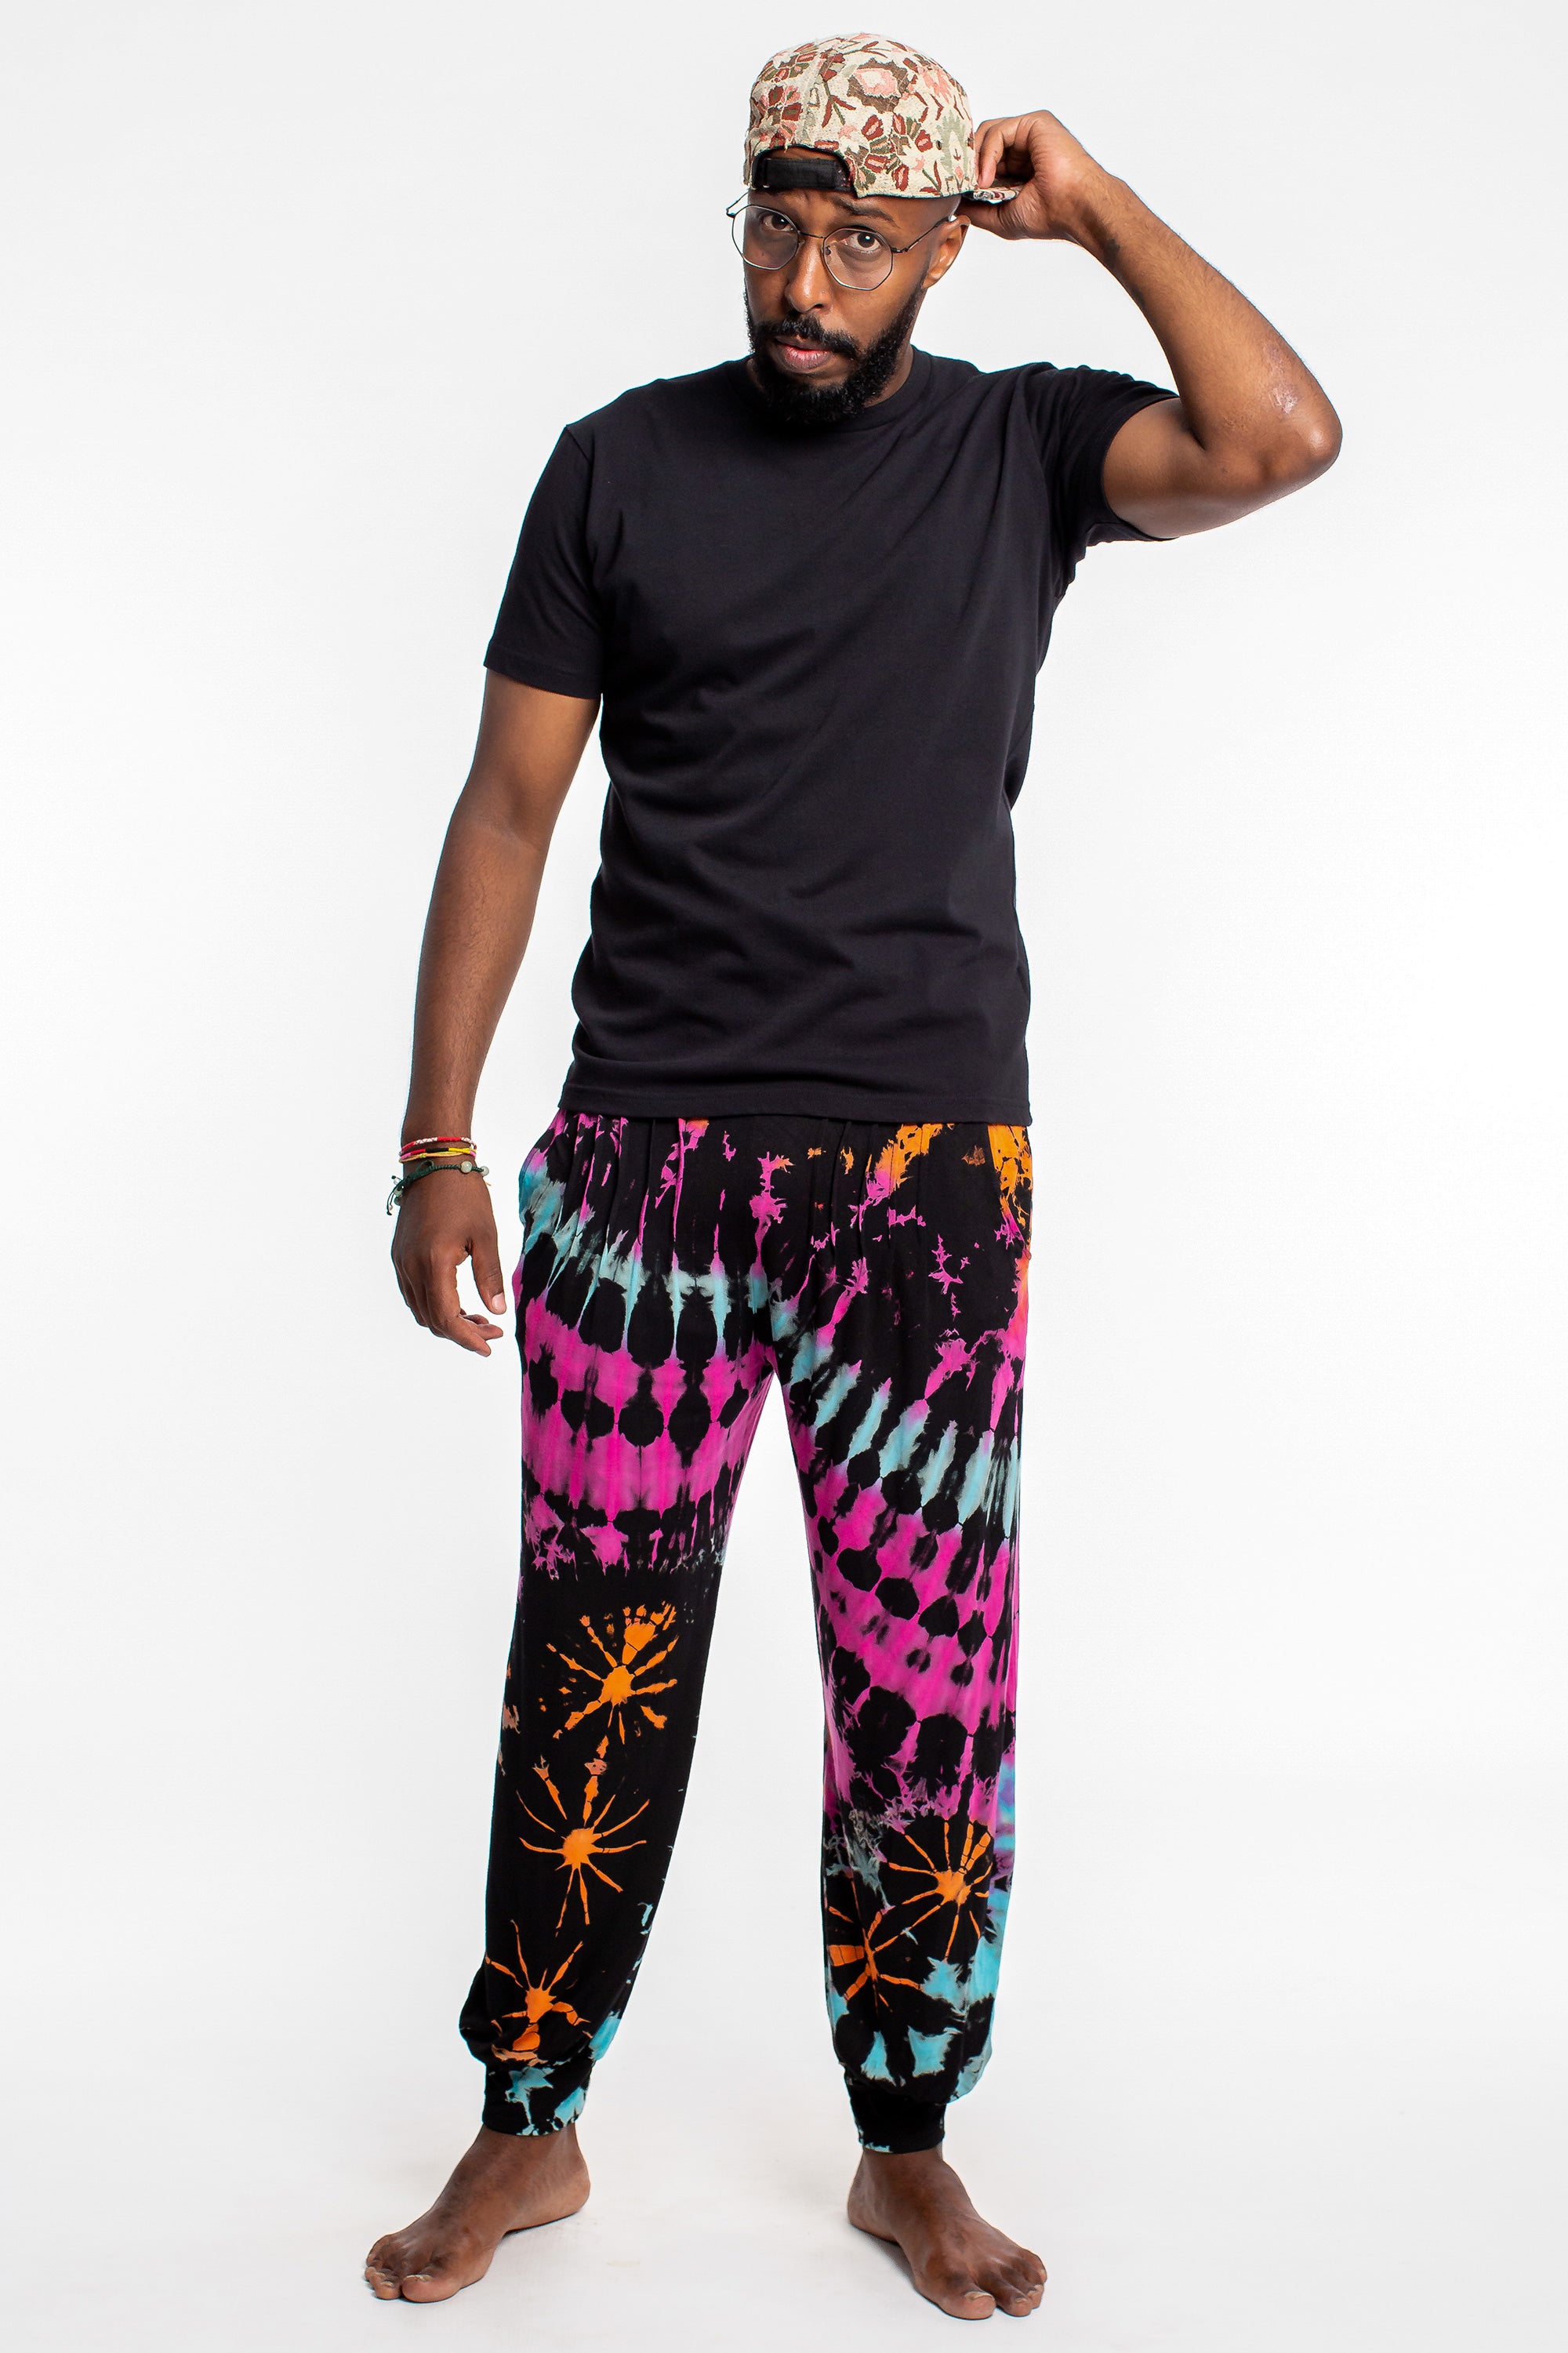 Men's Cotton Harem Pants in Plus and Tall Sizes - Get Comfy! | Odana's